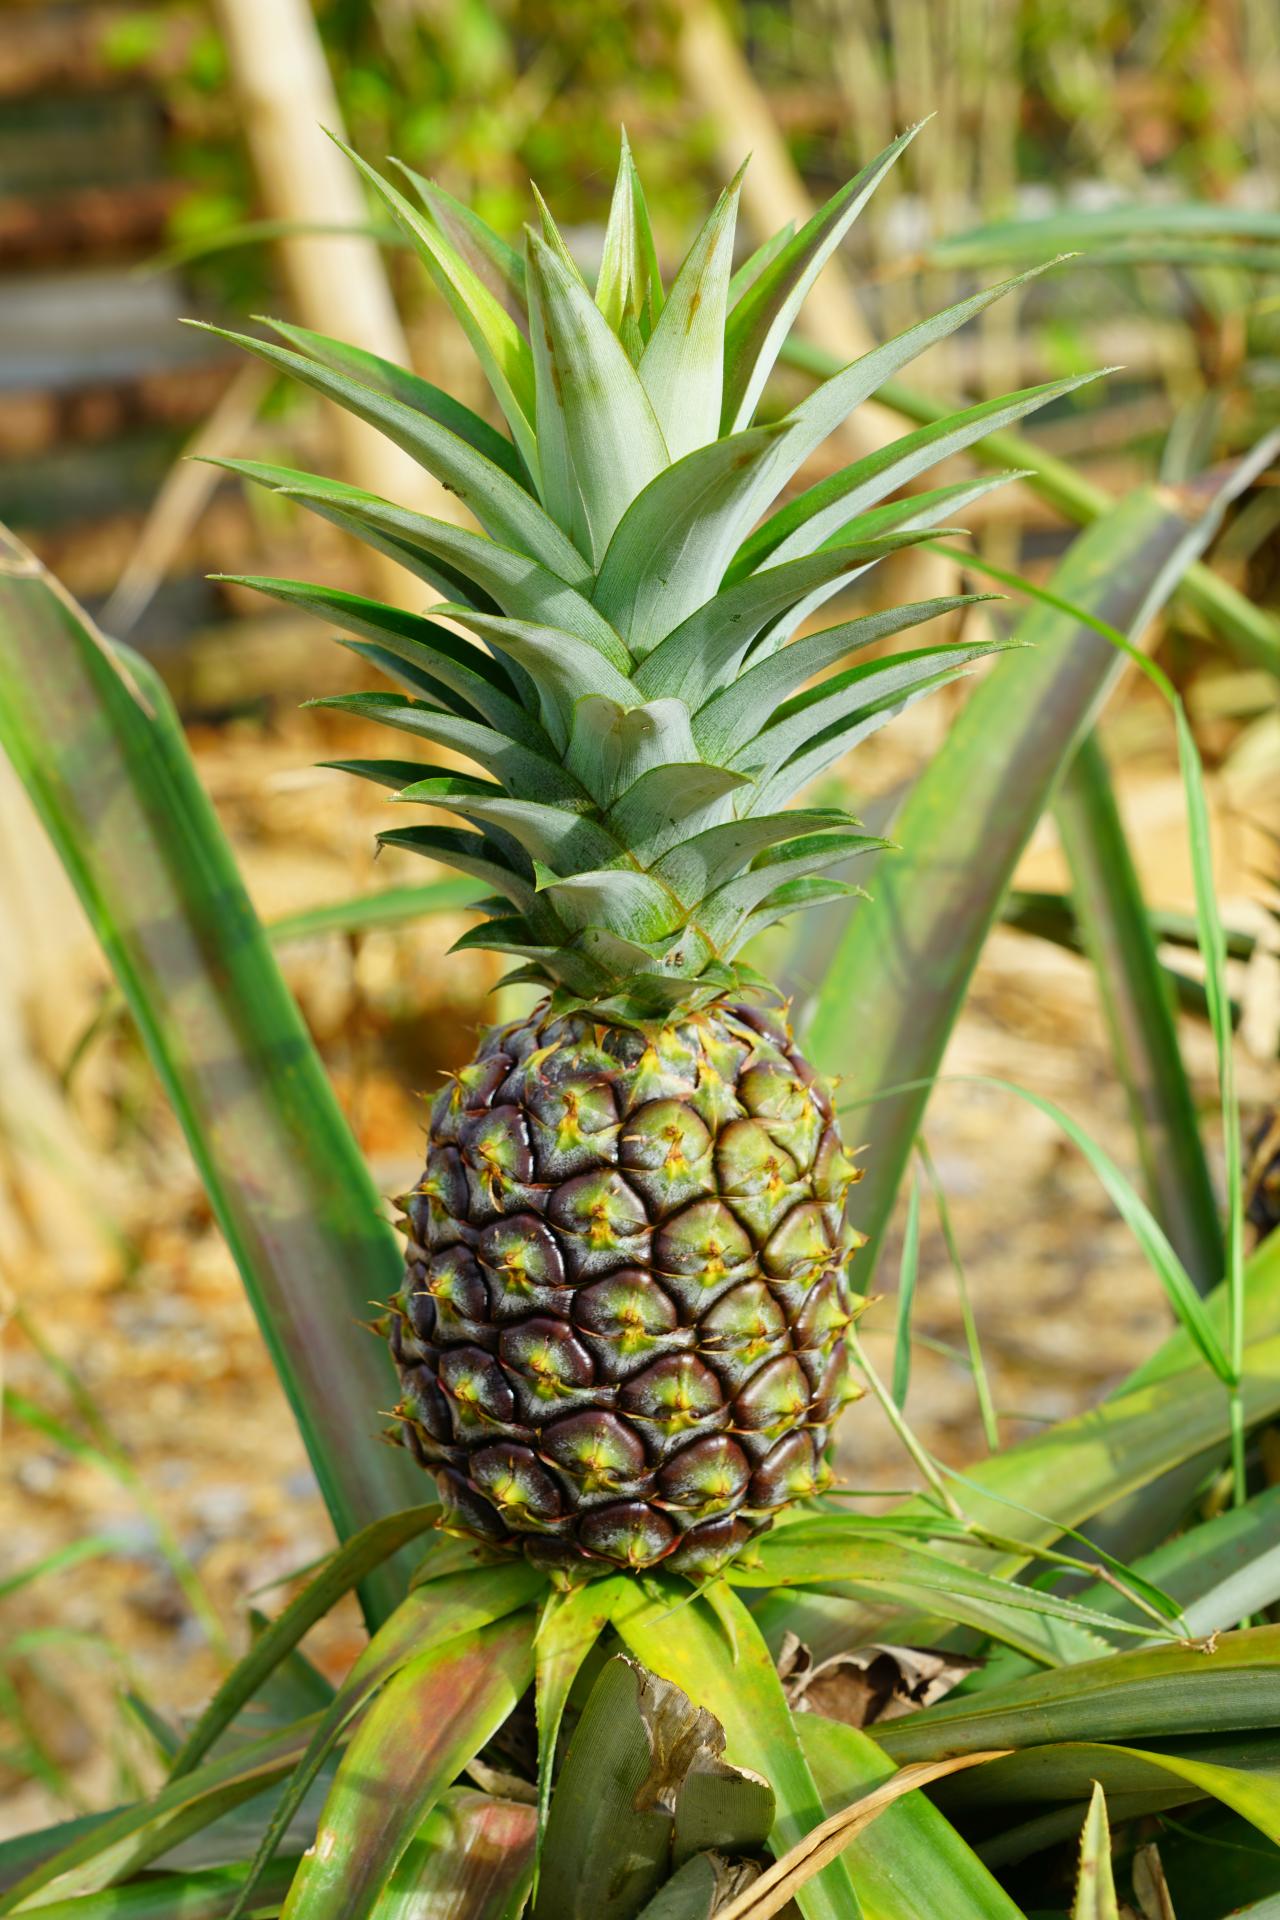 How long before you can harvest pineapple?